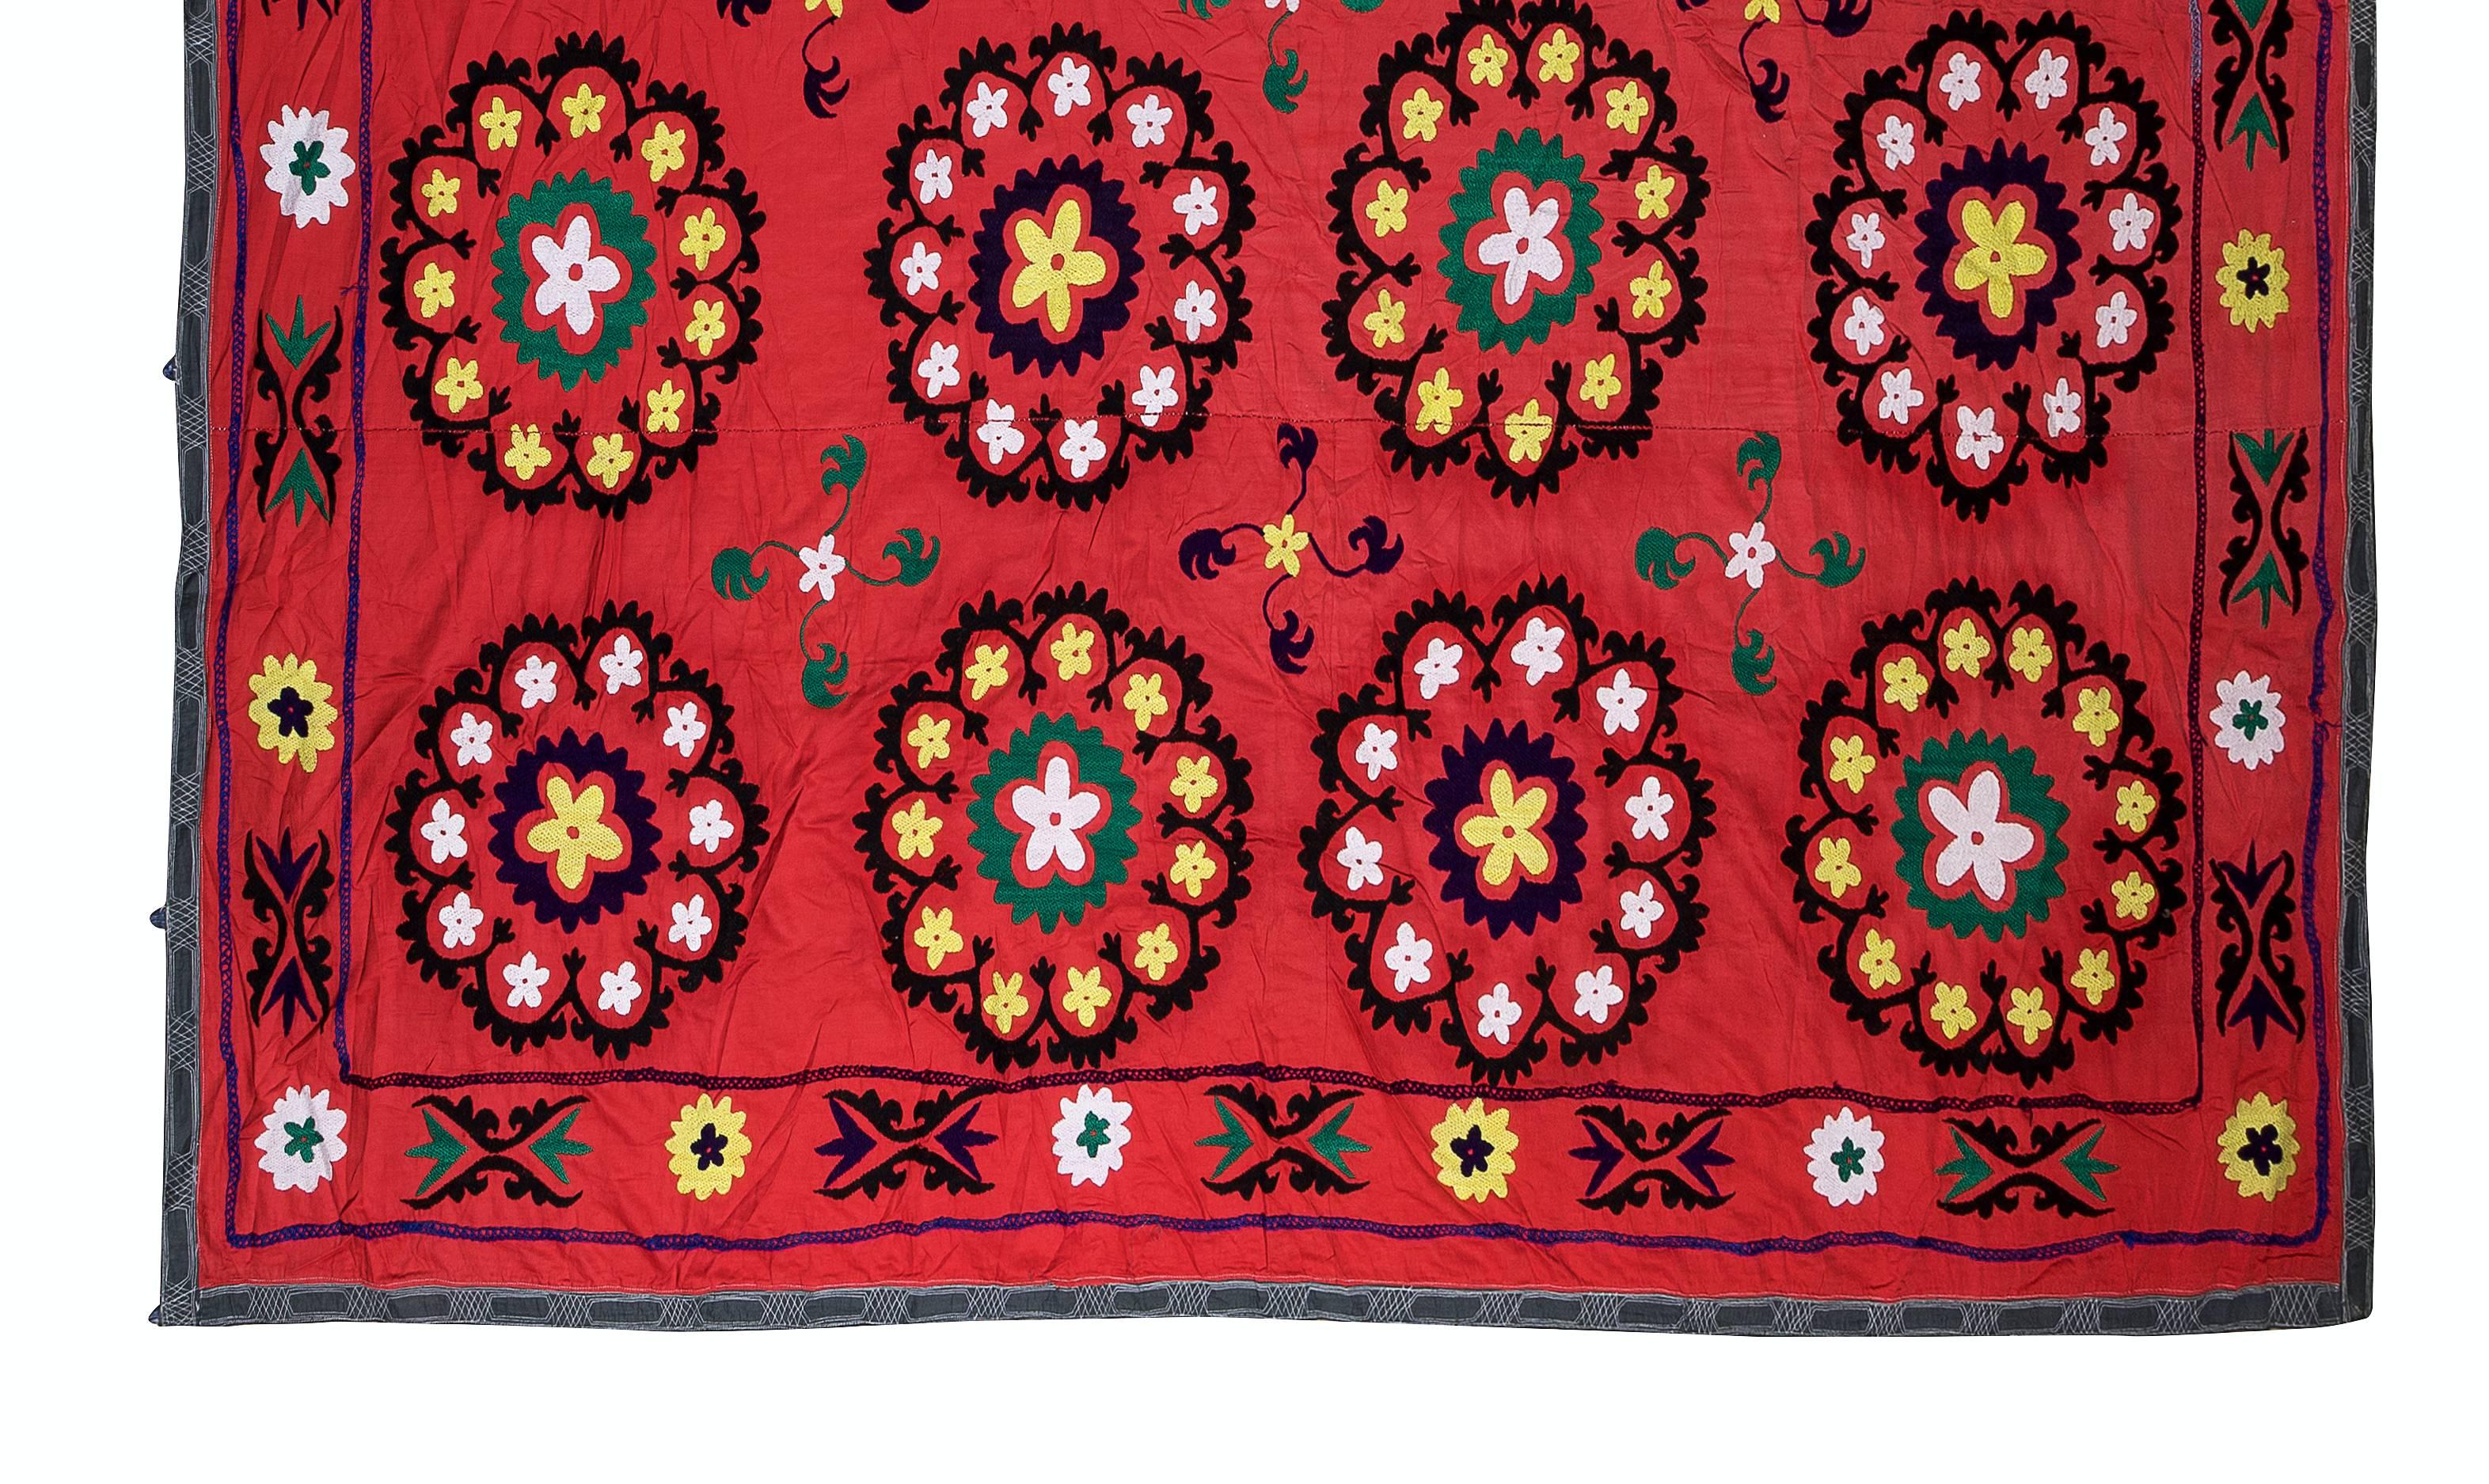 Uzbek 7.9x7.9 Ft Vintage Silk Embroidery Bed Cover, Red Asian Suzani Tablecloth For Sale